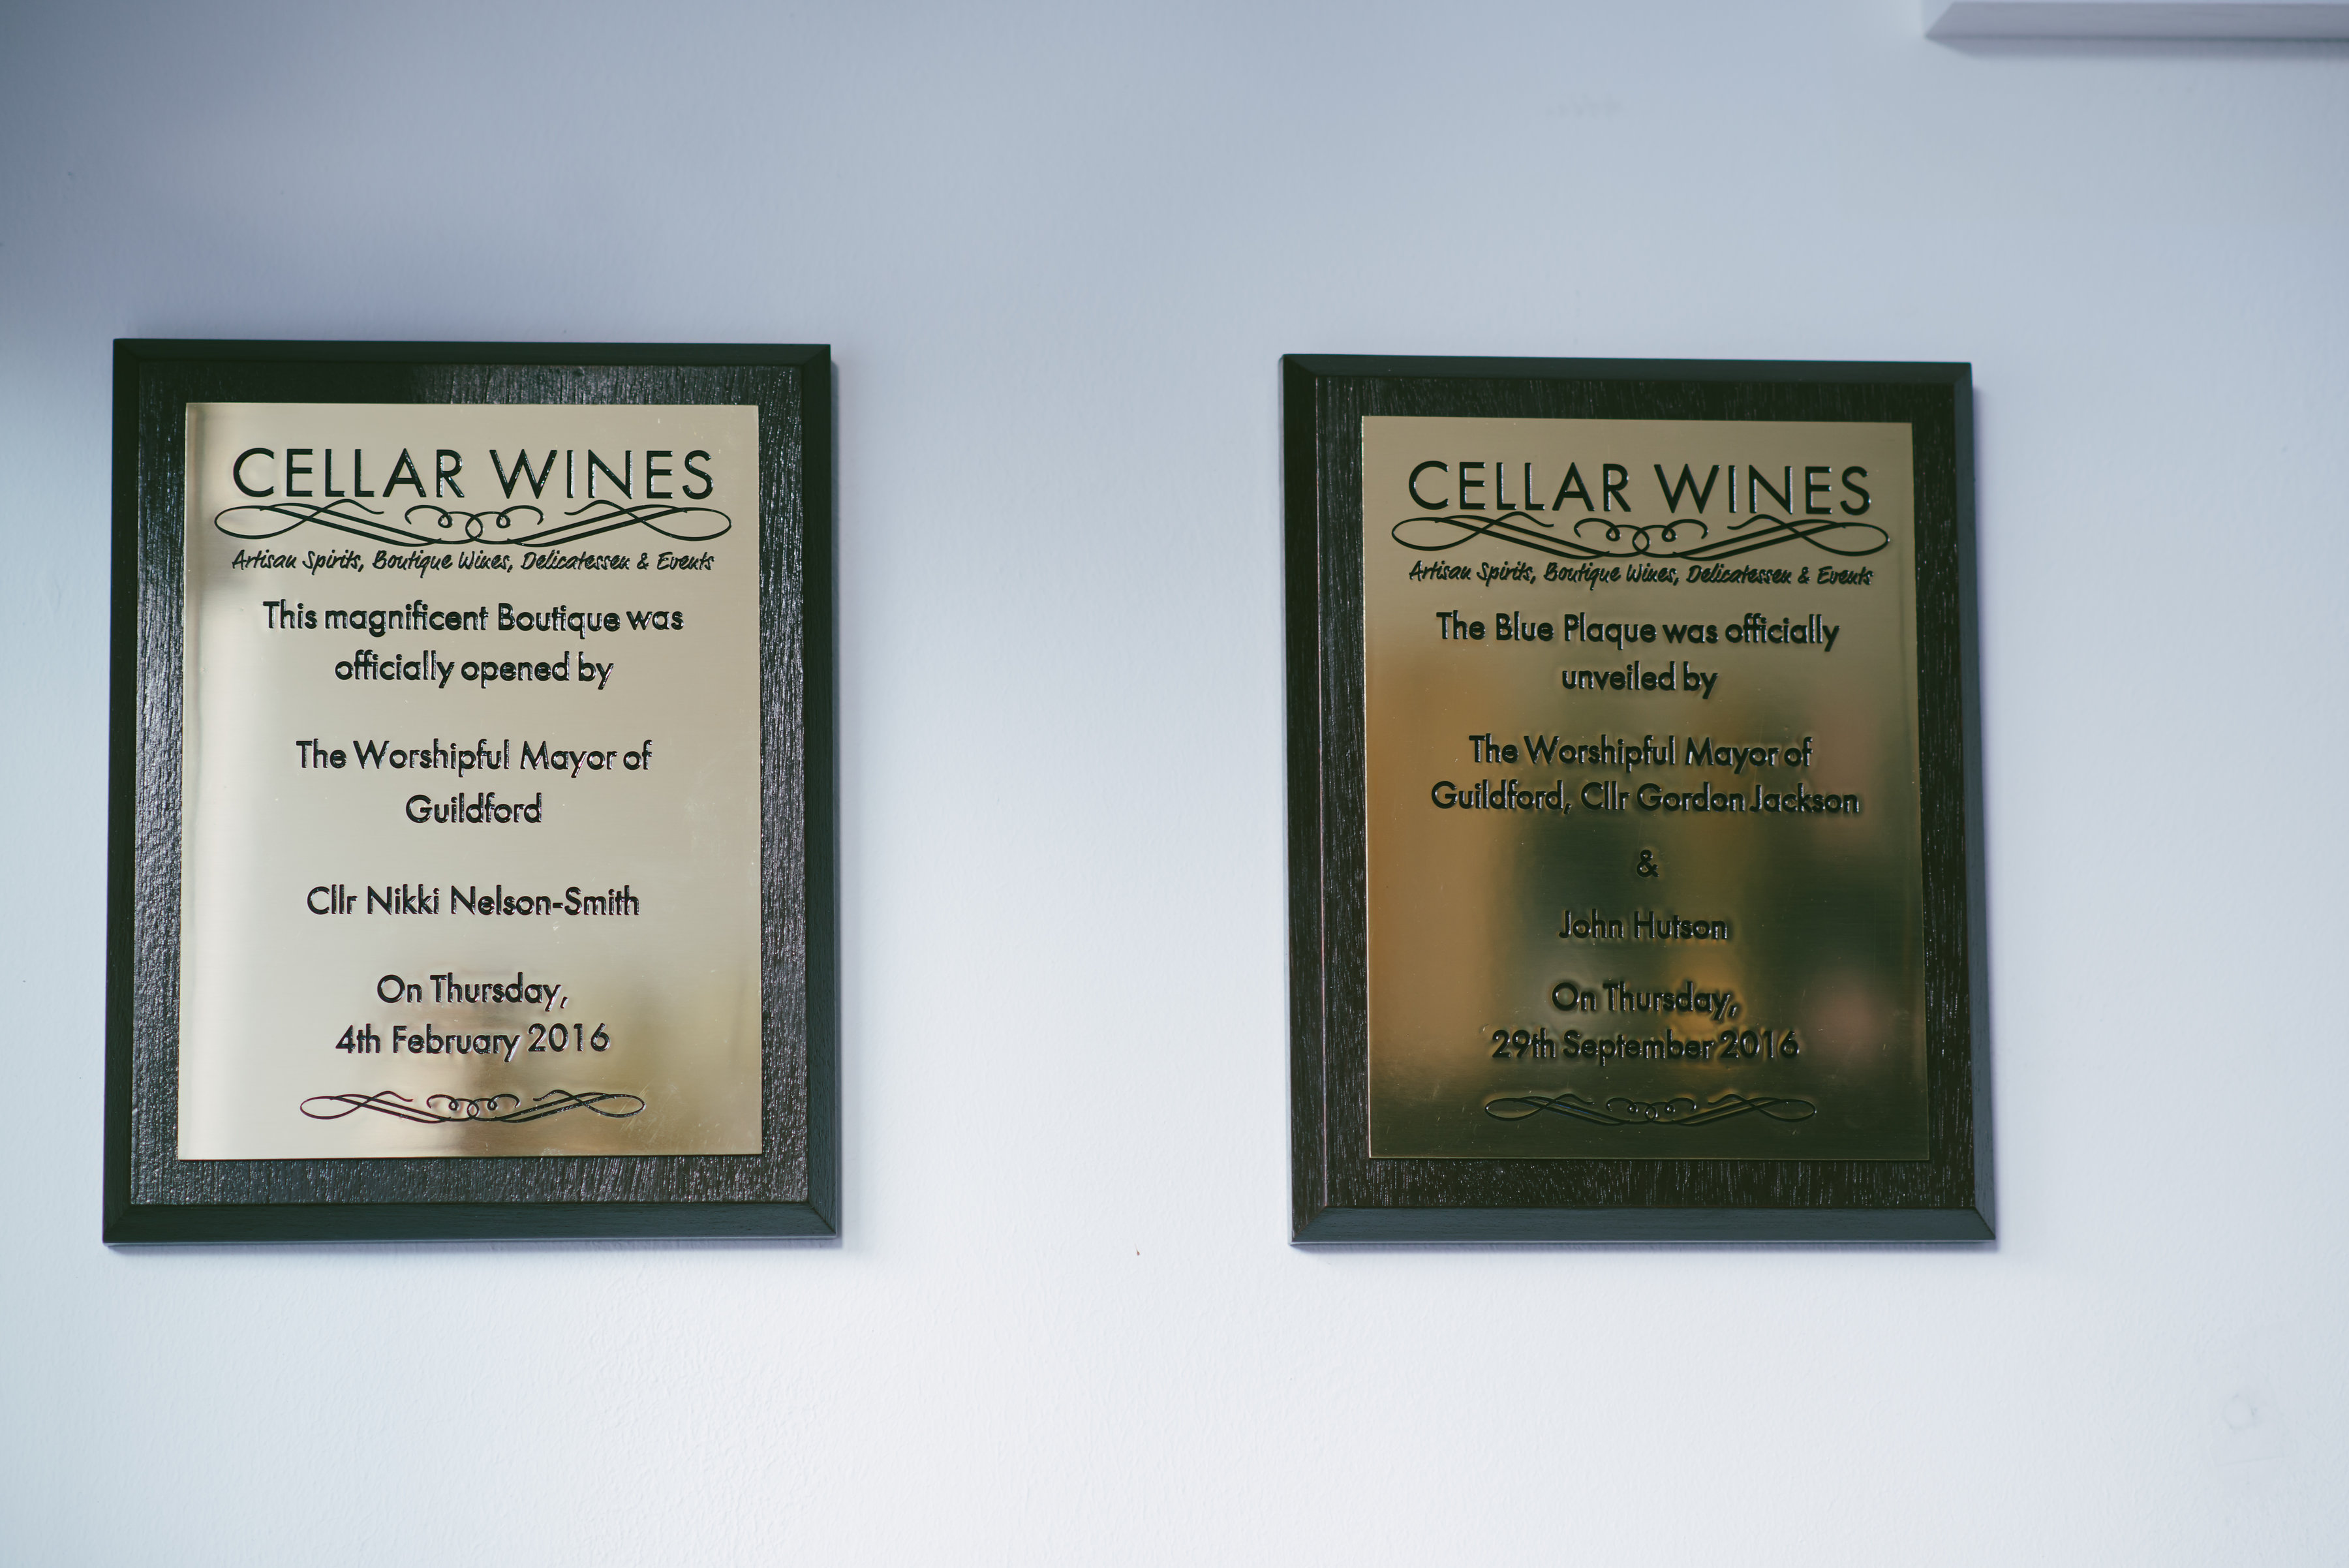 Plaques at Cellar Wines